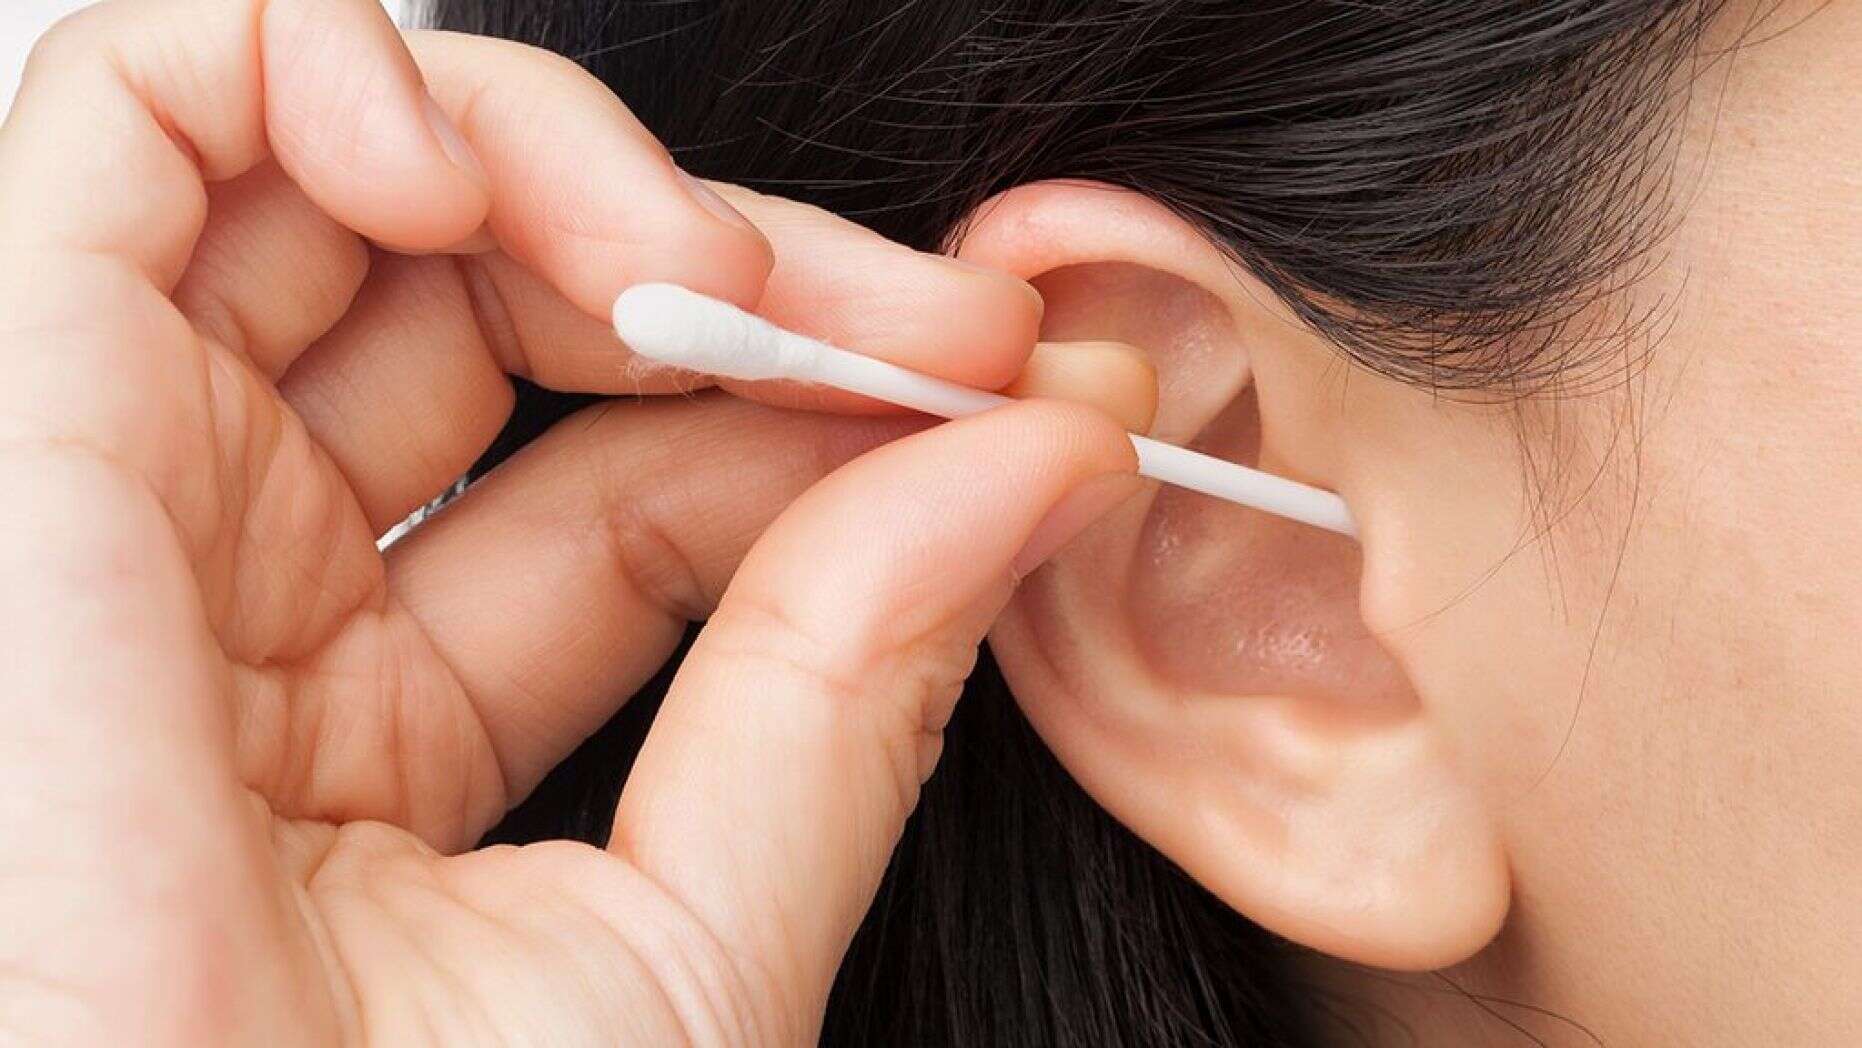 How Do I Properly Clean My Ears?